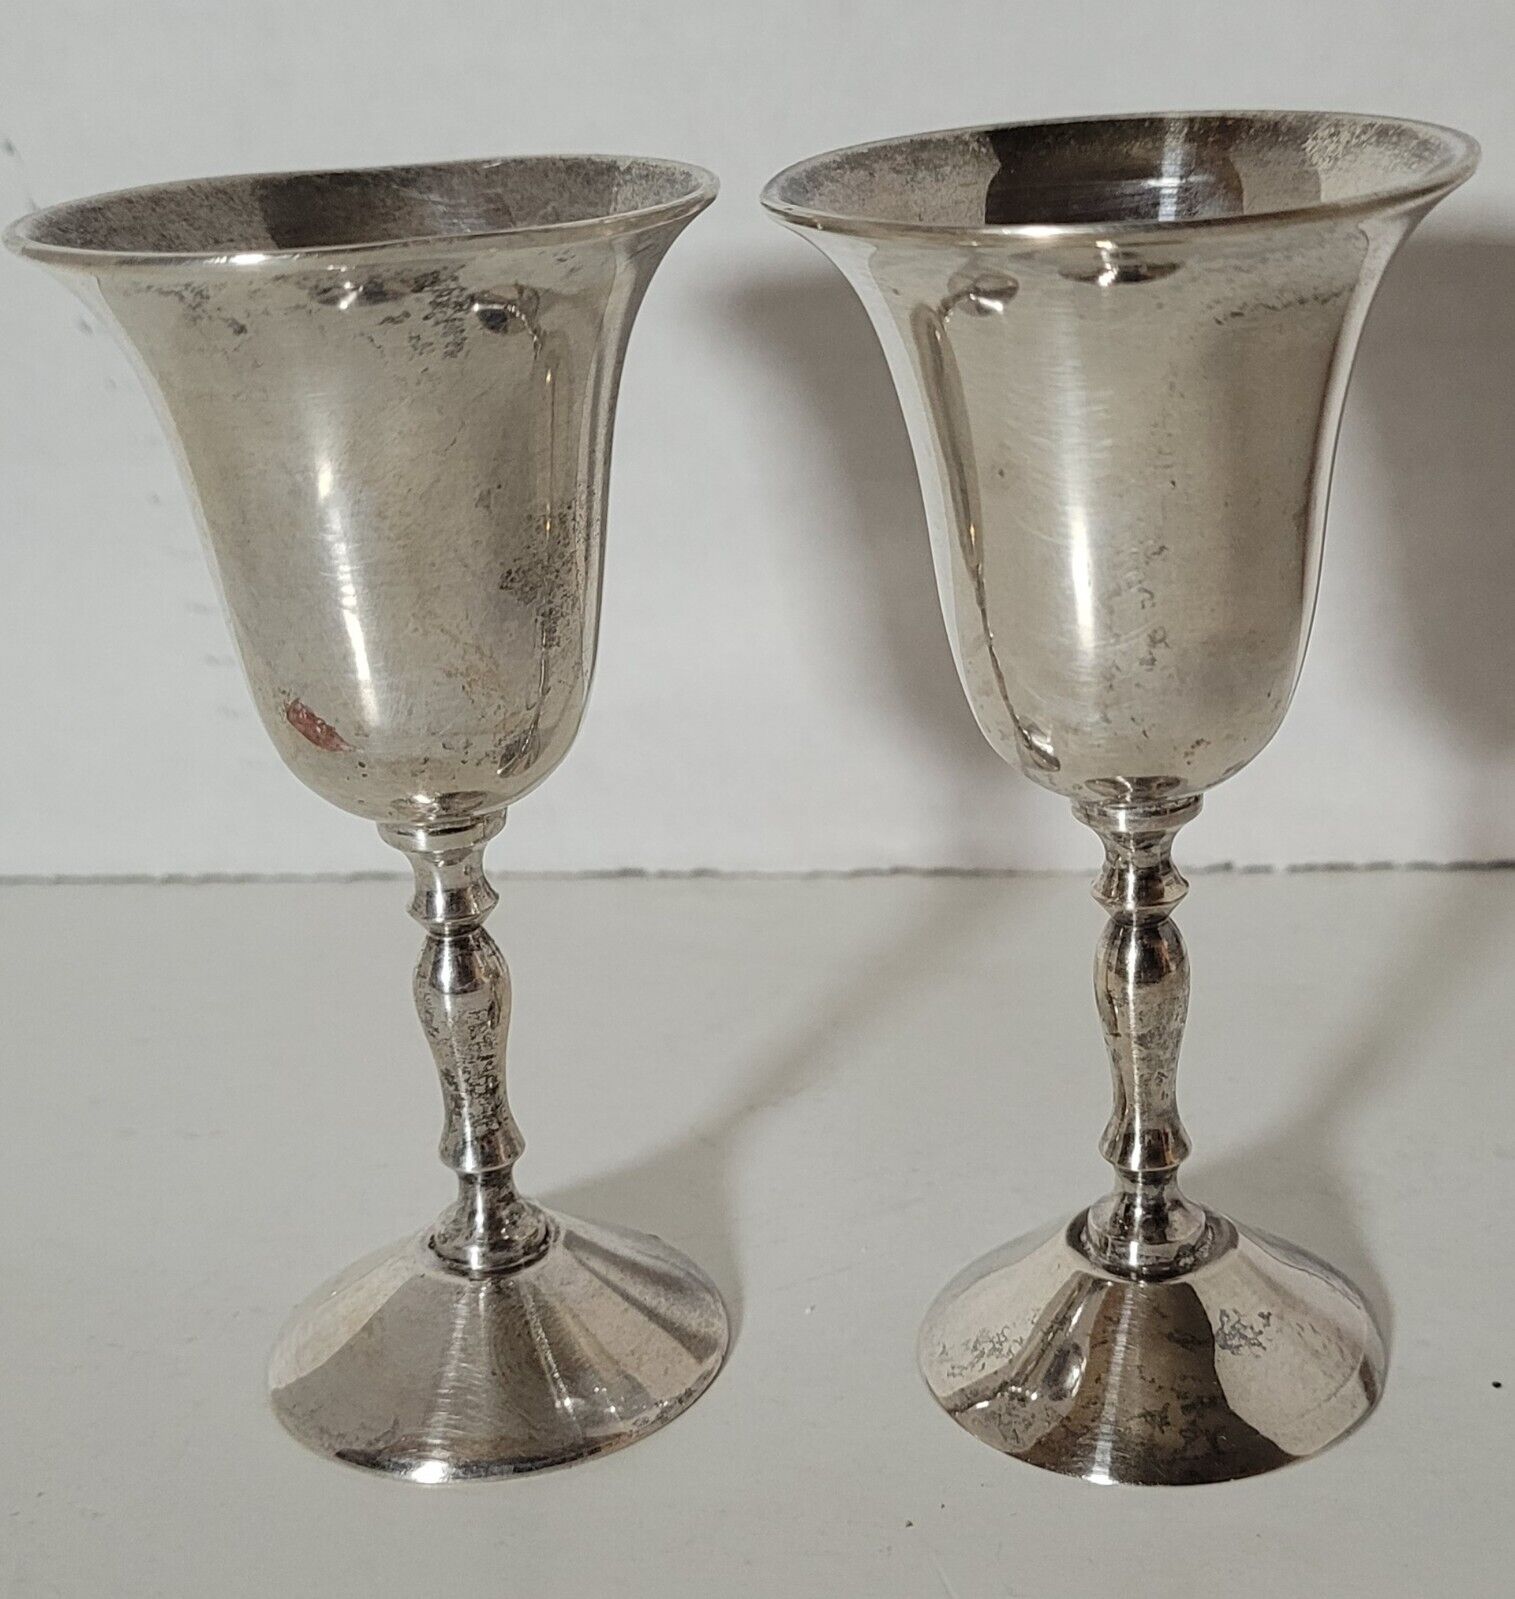 Vintage Silver-plate Cordial Tulip Fluted Goblets Set of 2 -  3 3/4 in. tall